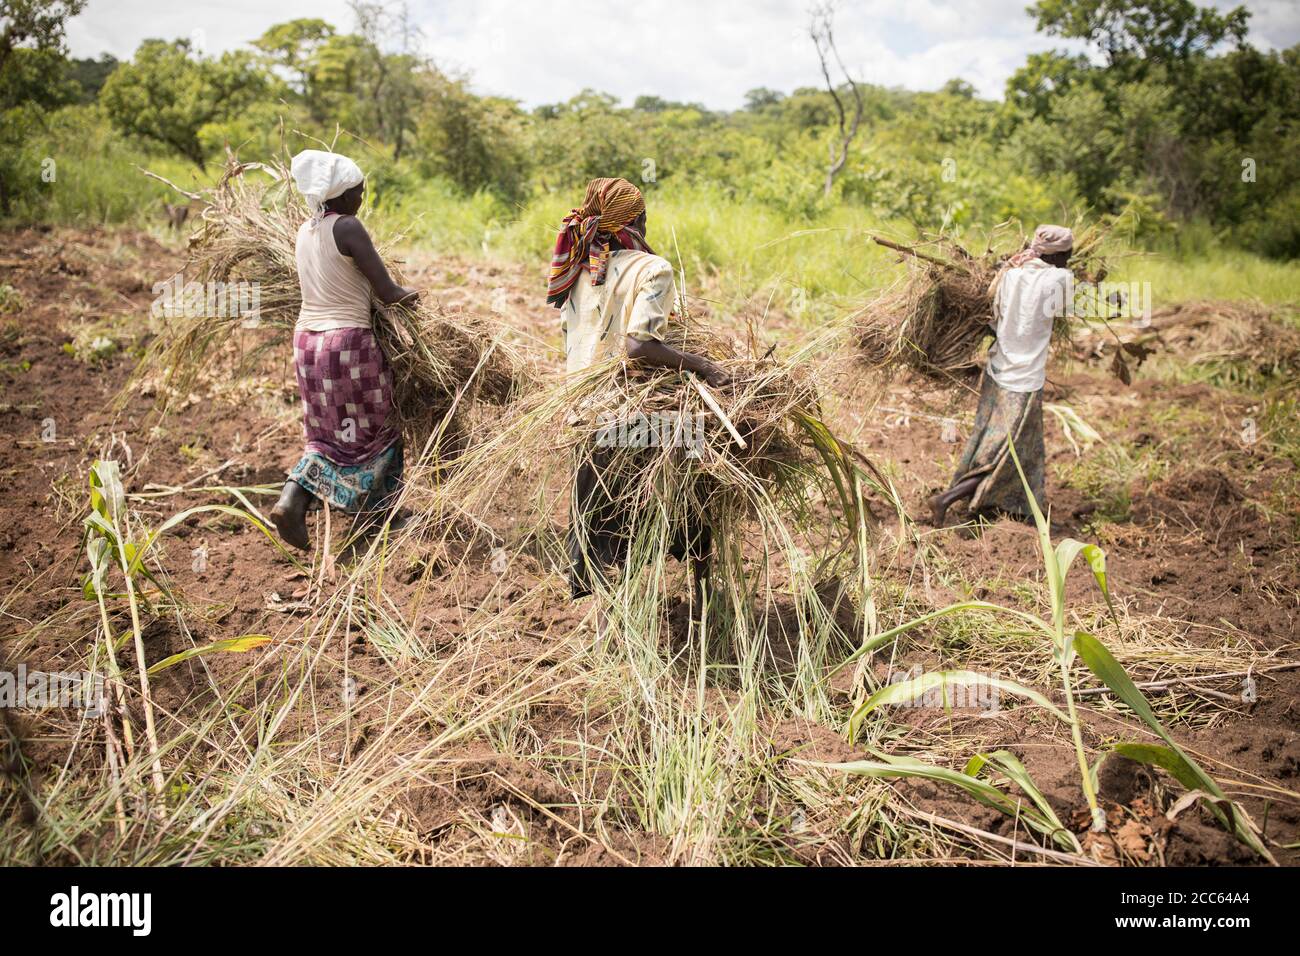 Three women refugees from South Sudan clears land for farming in a field outside Palabek Refugee Settlement in northern Uganda, East Africa. Stock Photo